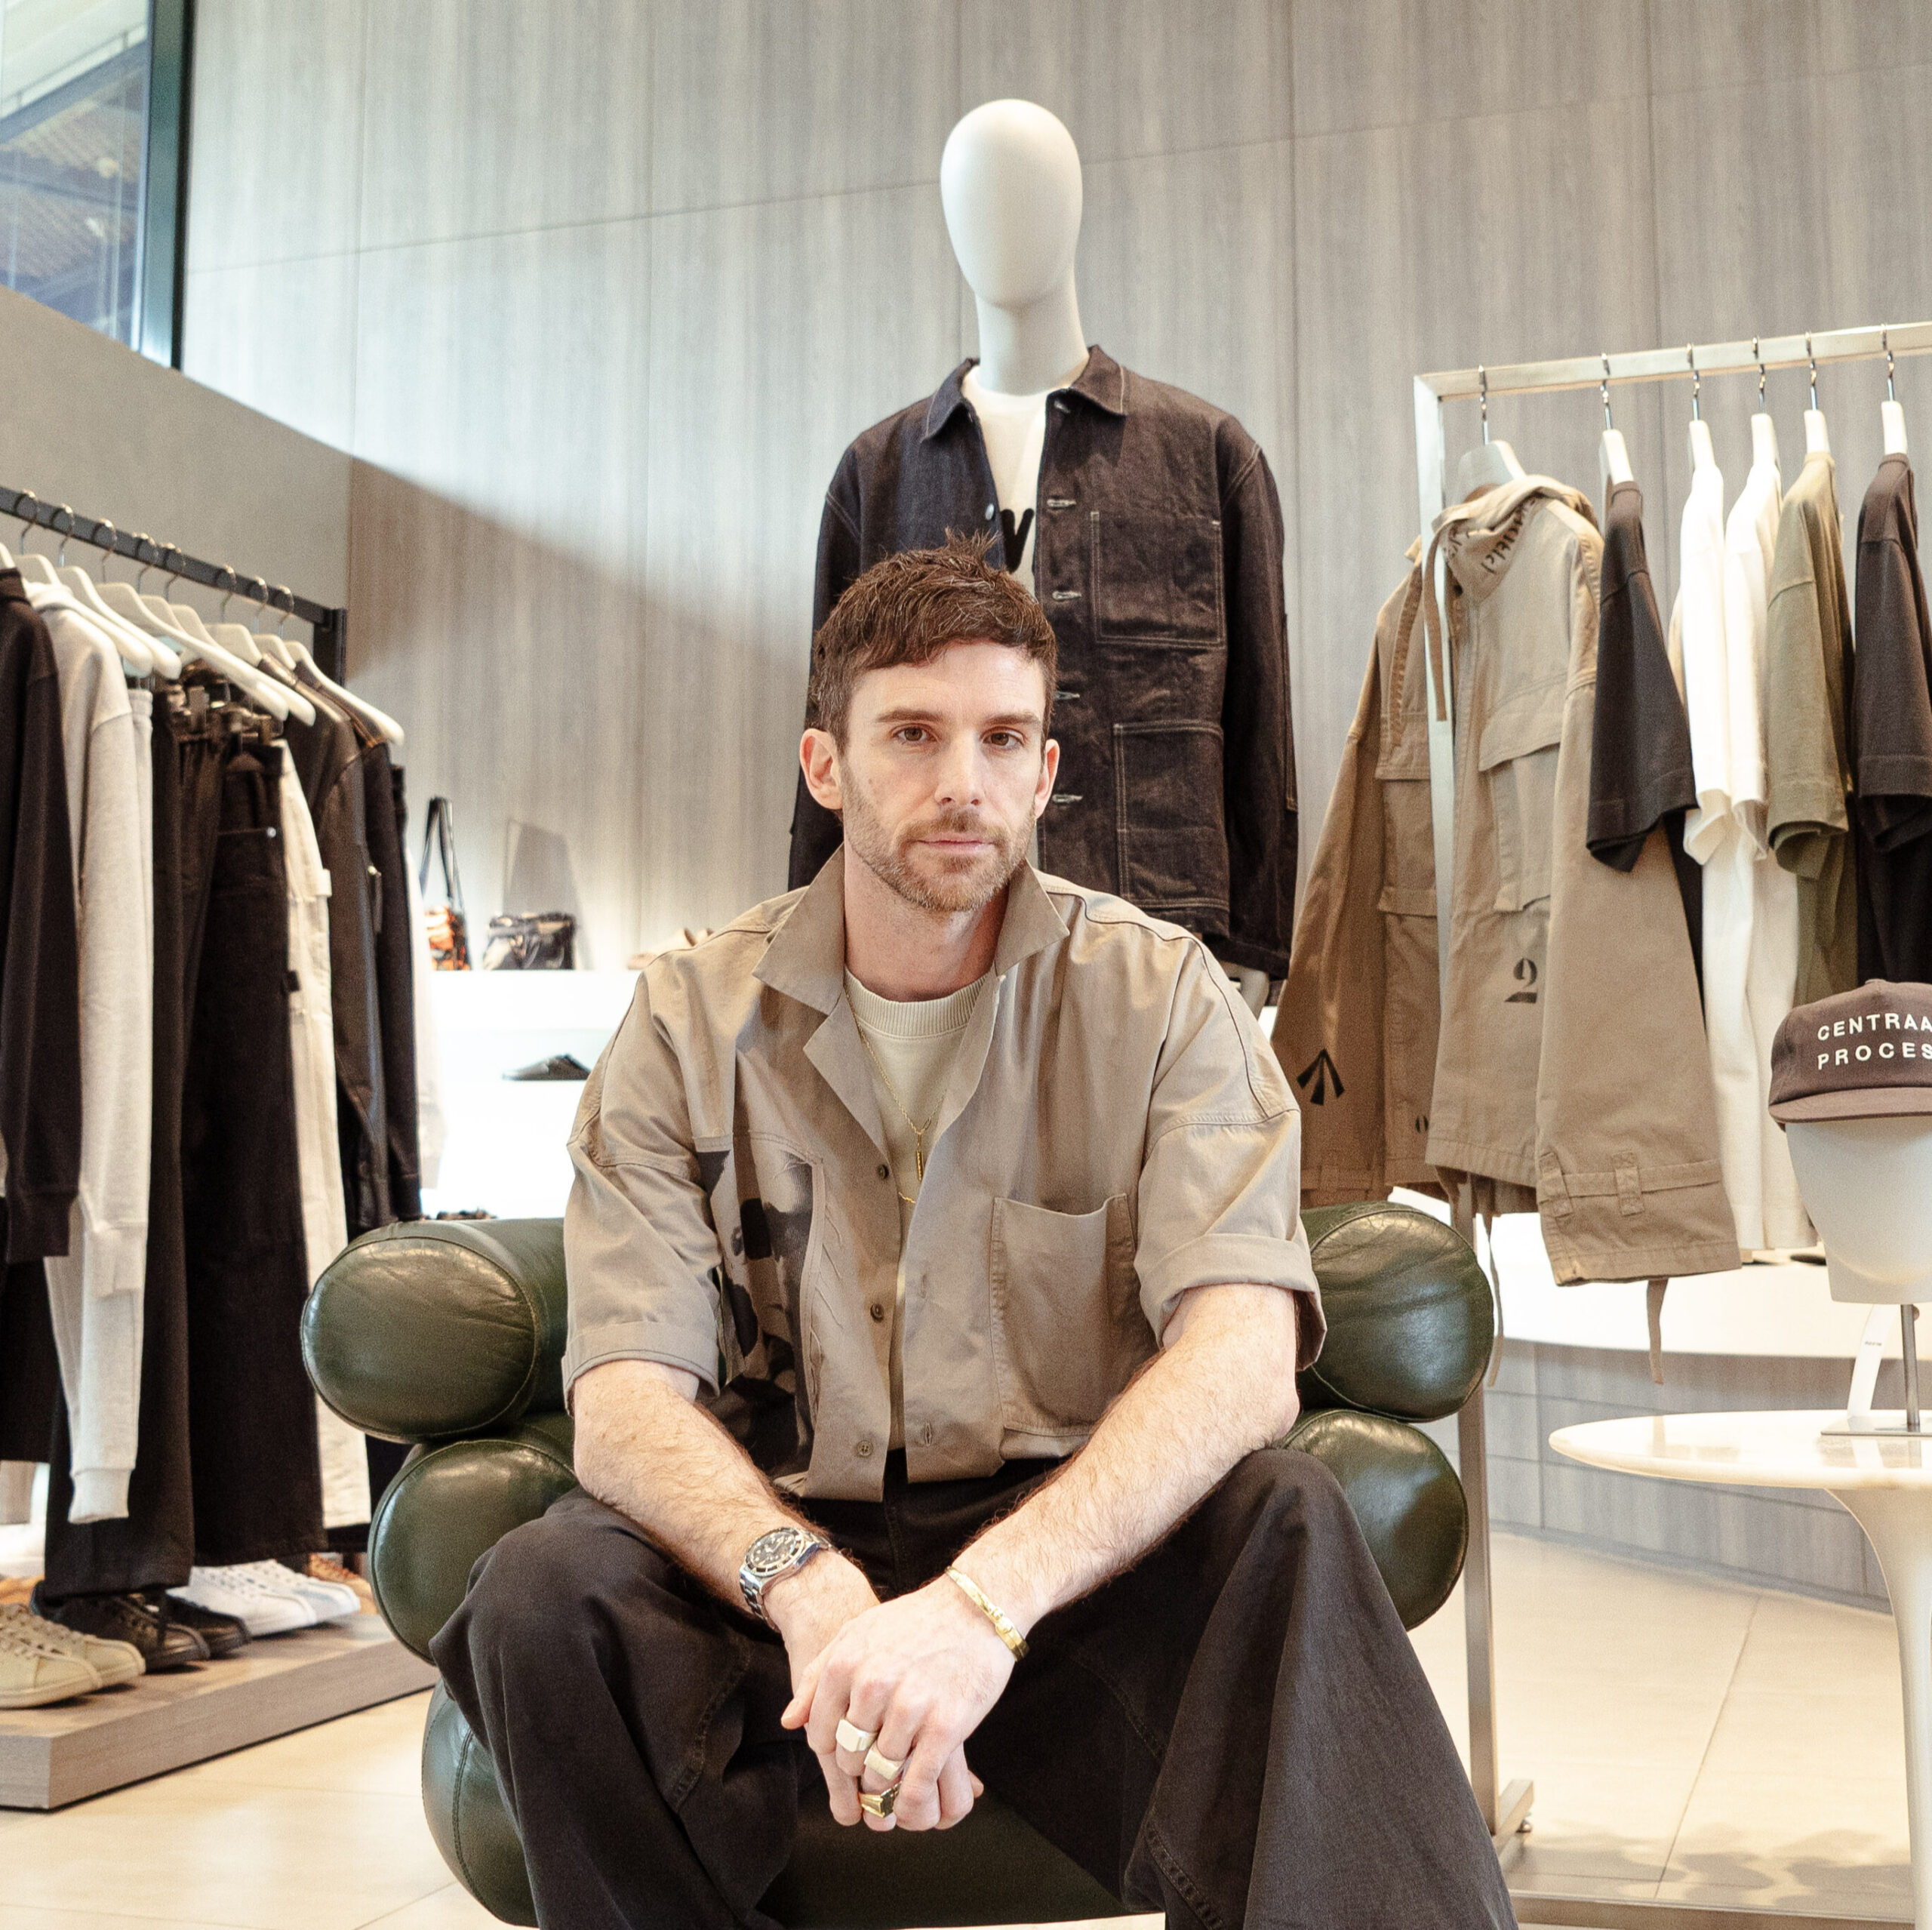 Coldplay’s Guy Berryman launches menswear brand Applied Art Forms (A/A/F) in the Philippines